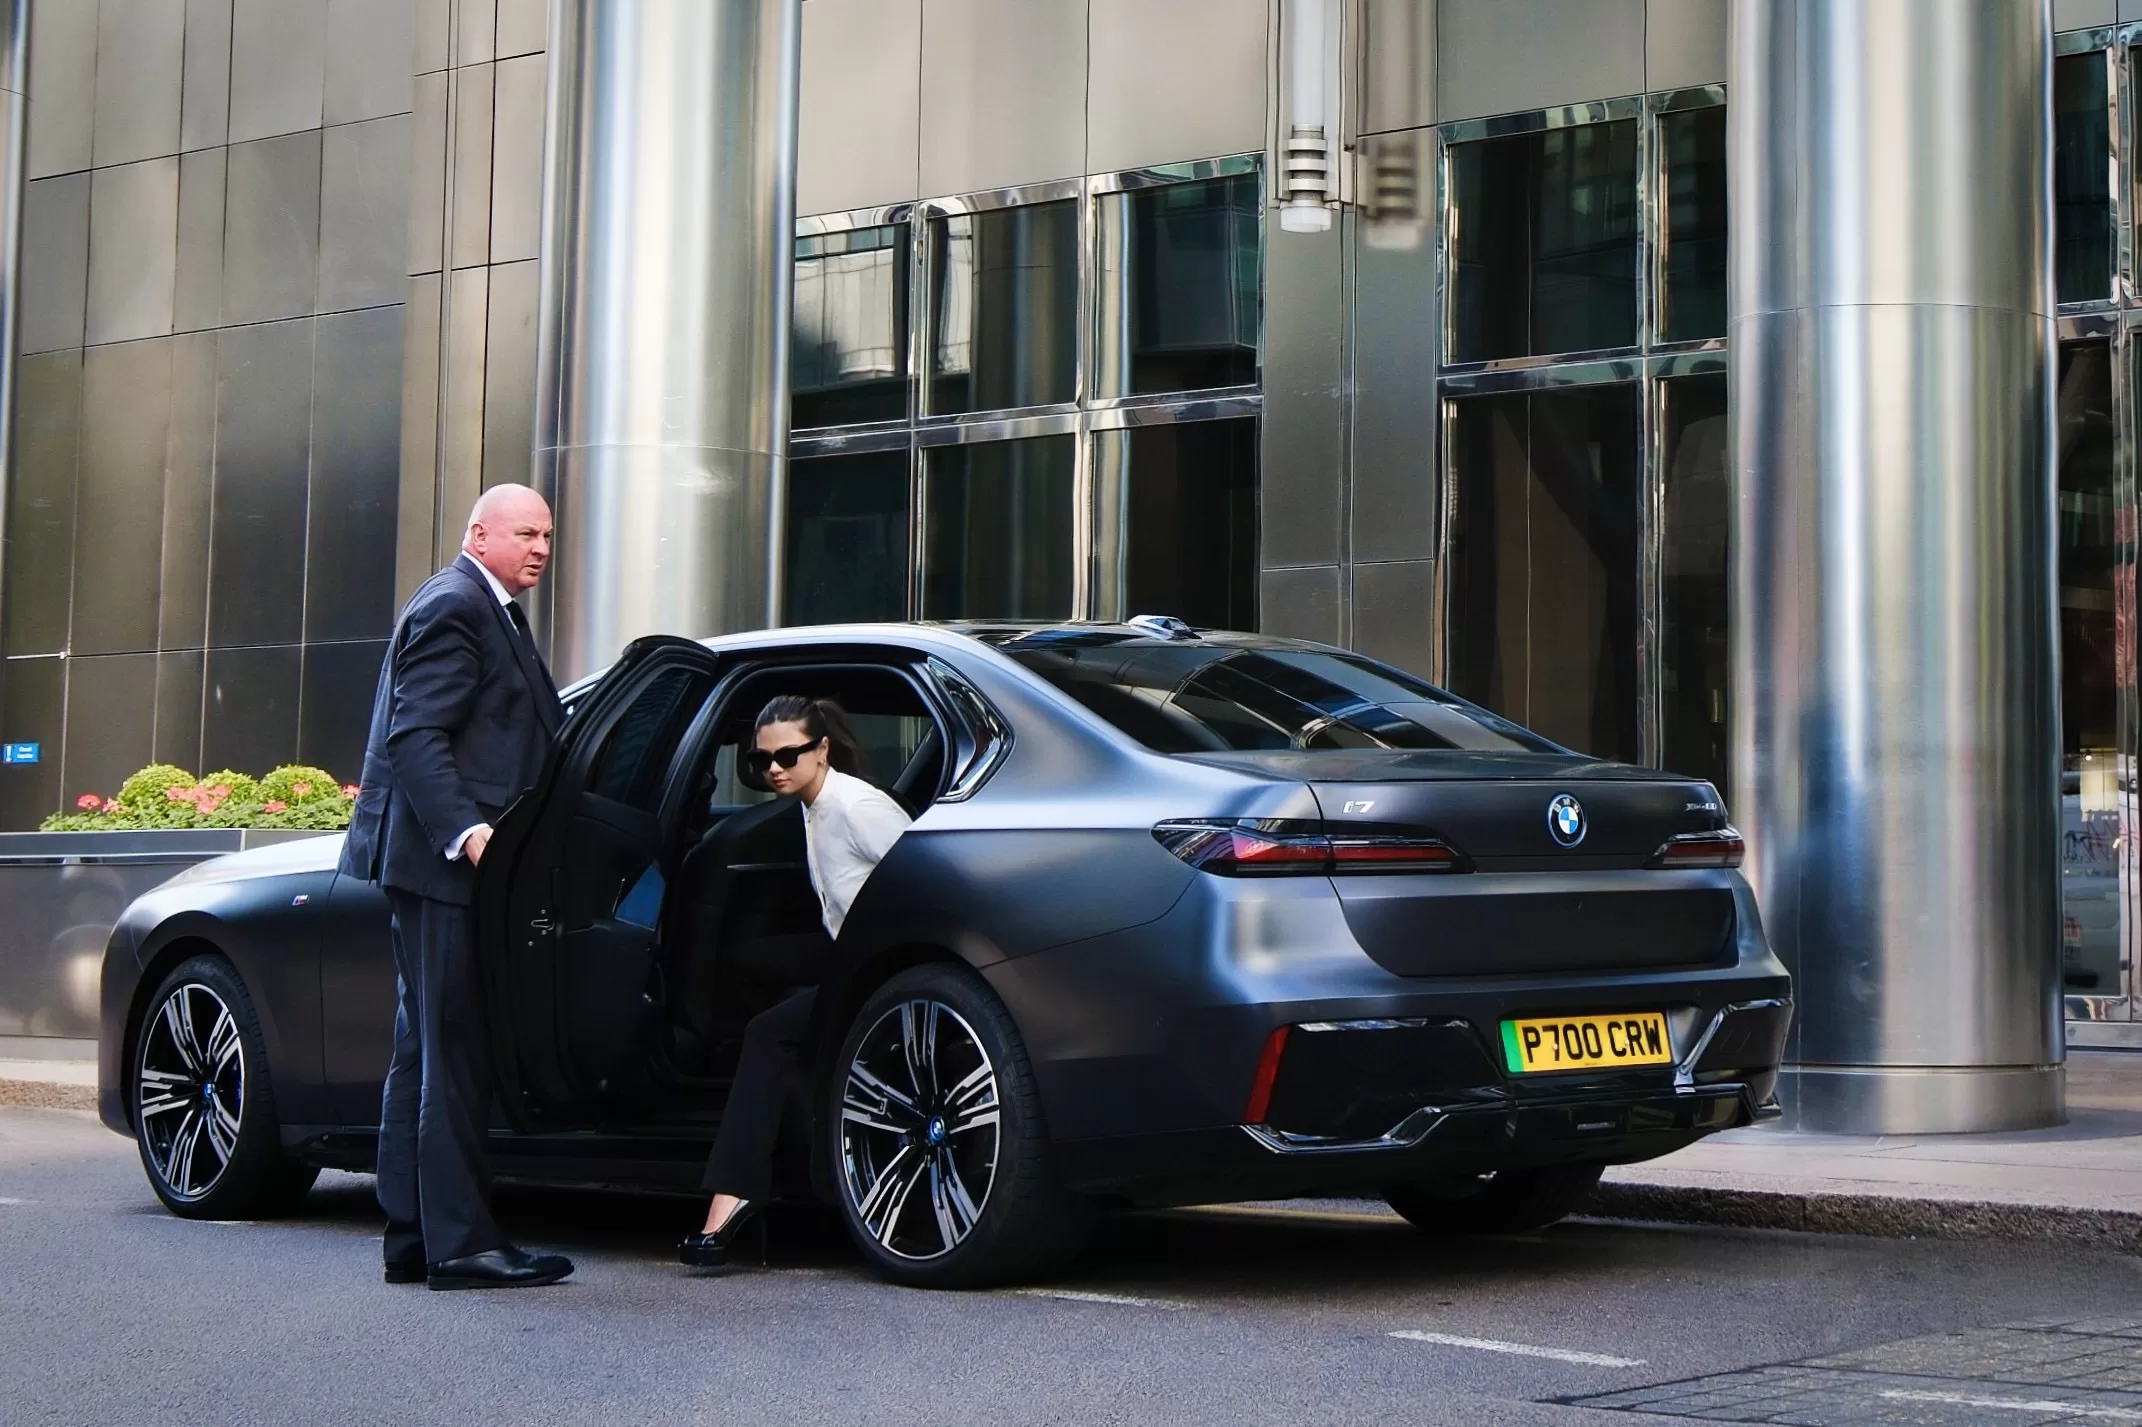 Crawfords Chauffeur Services picking up passenger Kelly Fountain from Canary Wharf in London